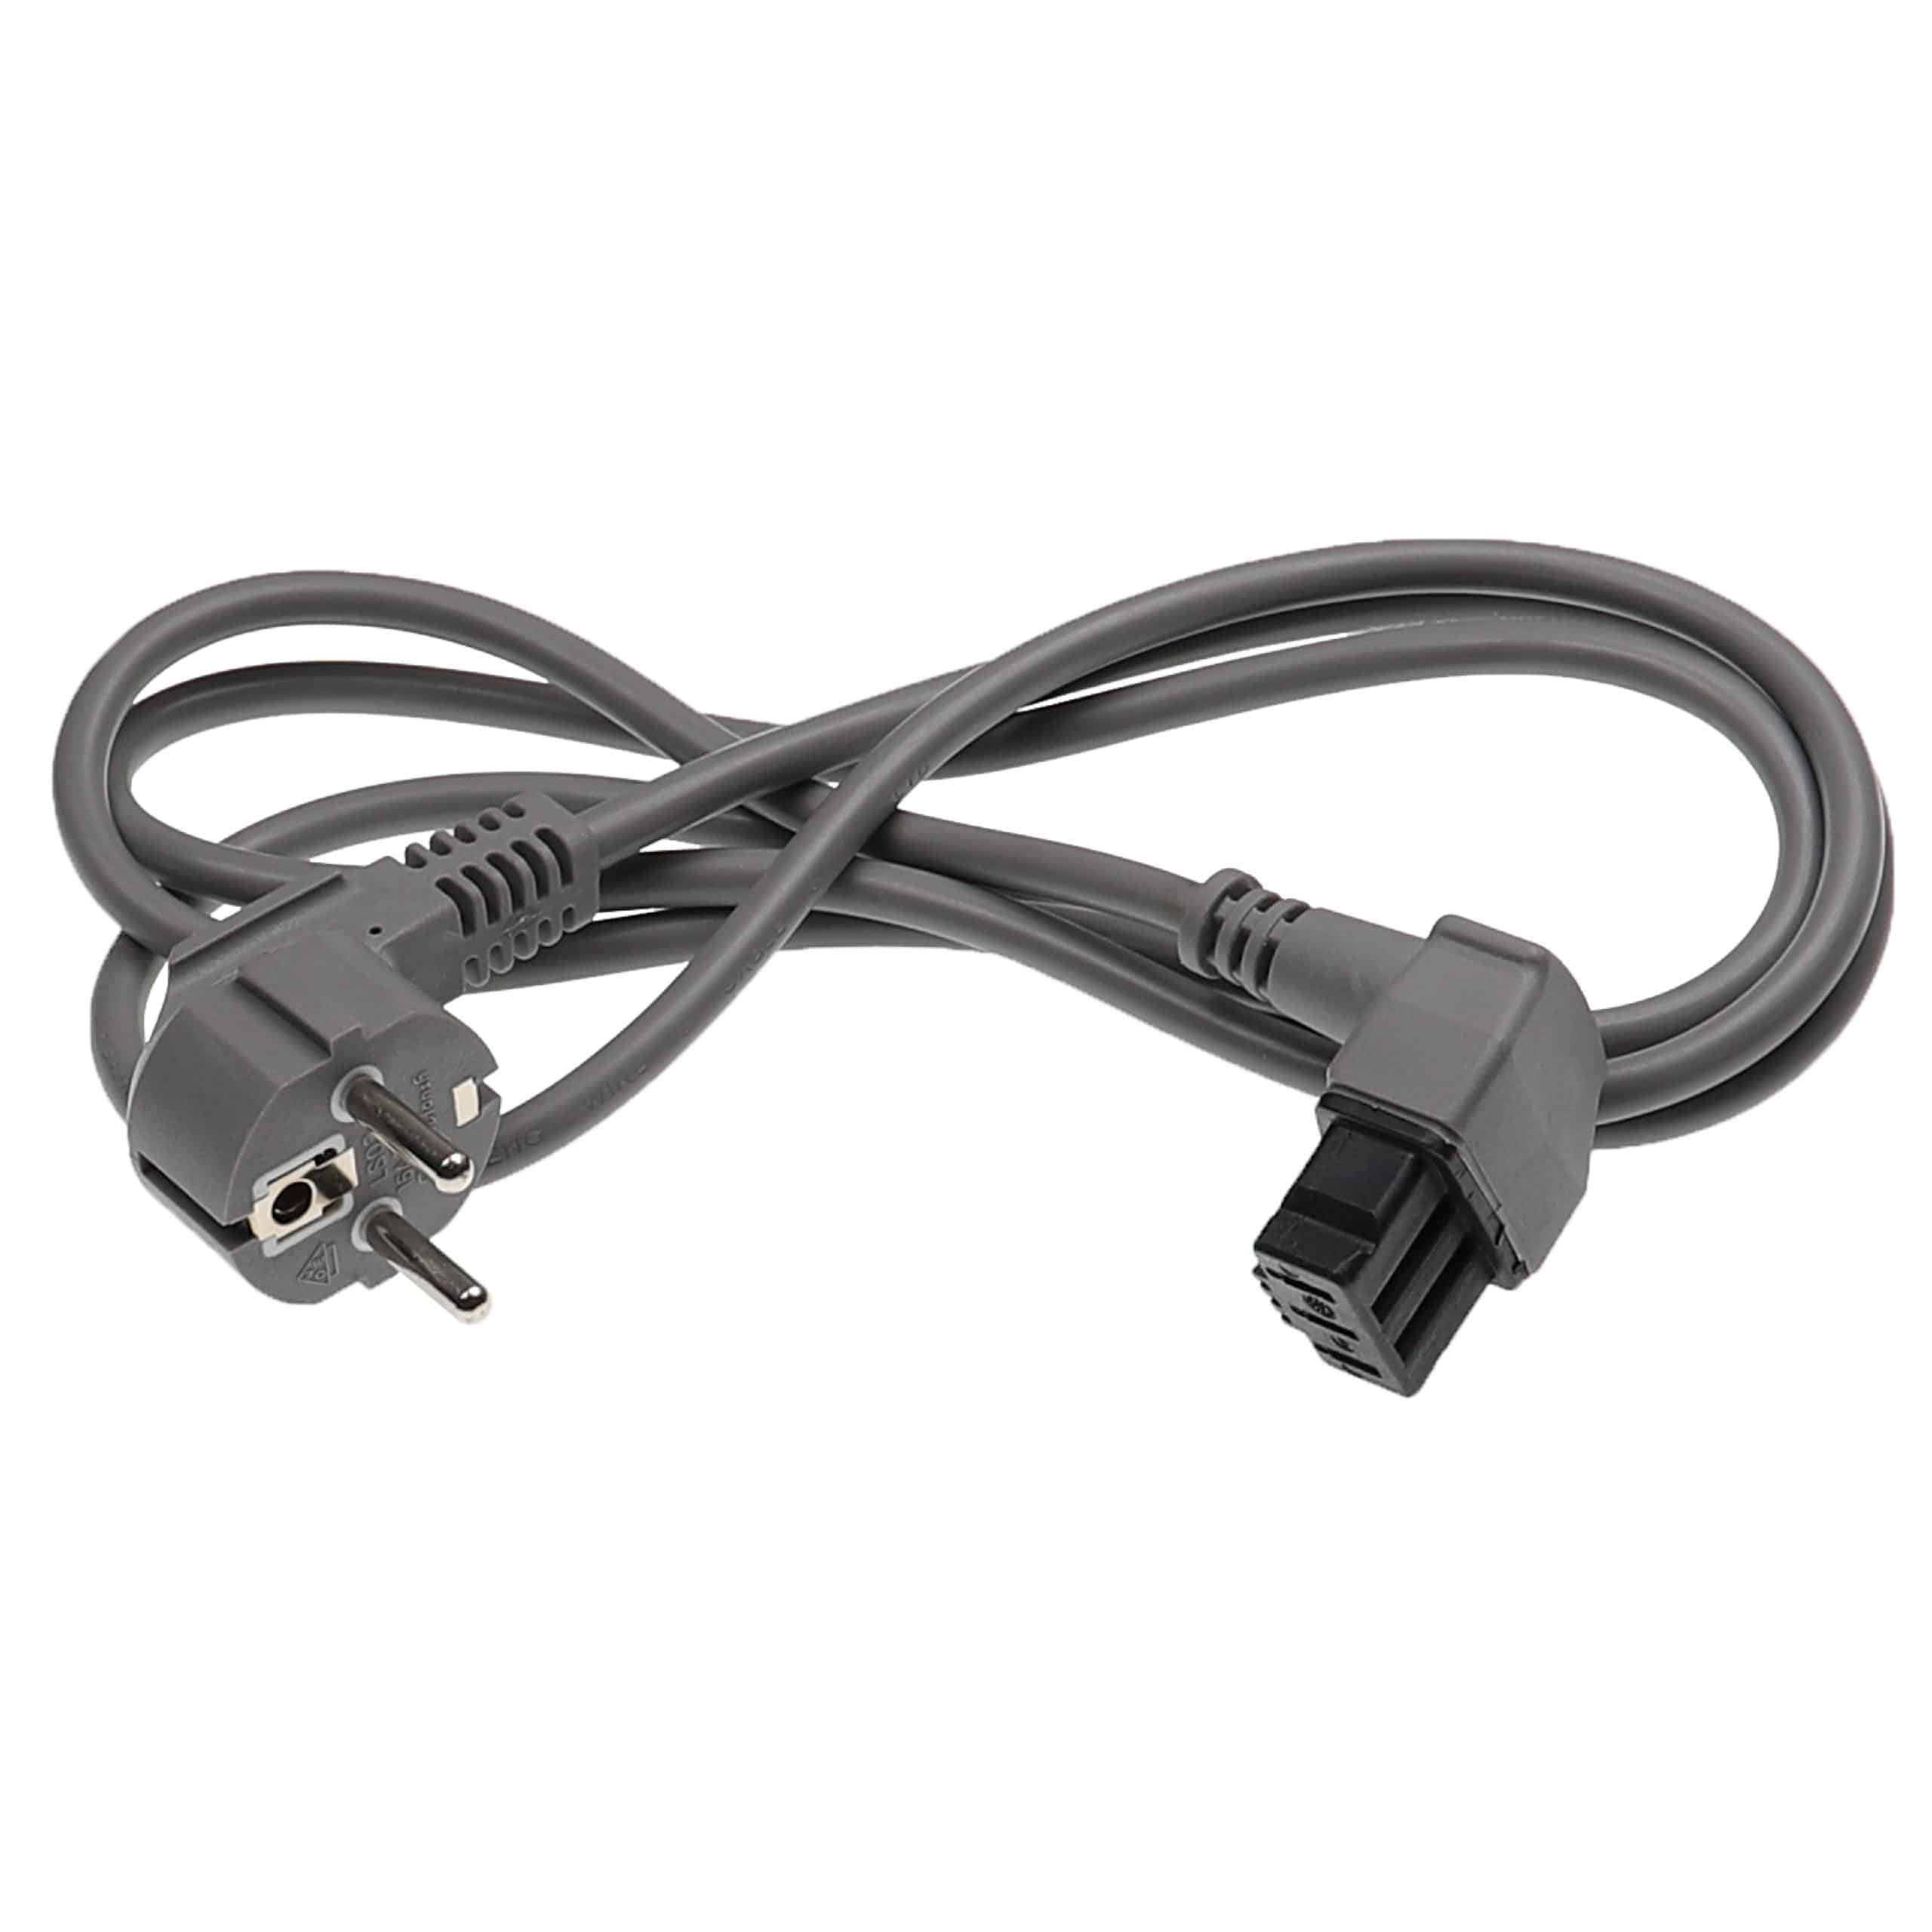 Power Cable as Replacement for 333714593308, 645033 suitable for Bosch, Siemens Dishwasher etc.